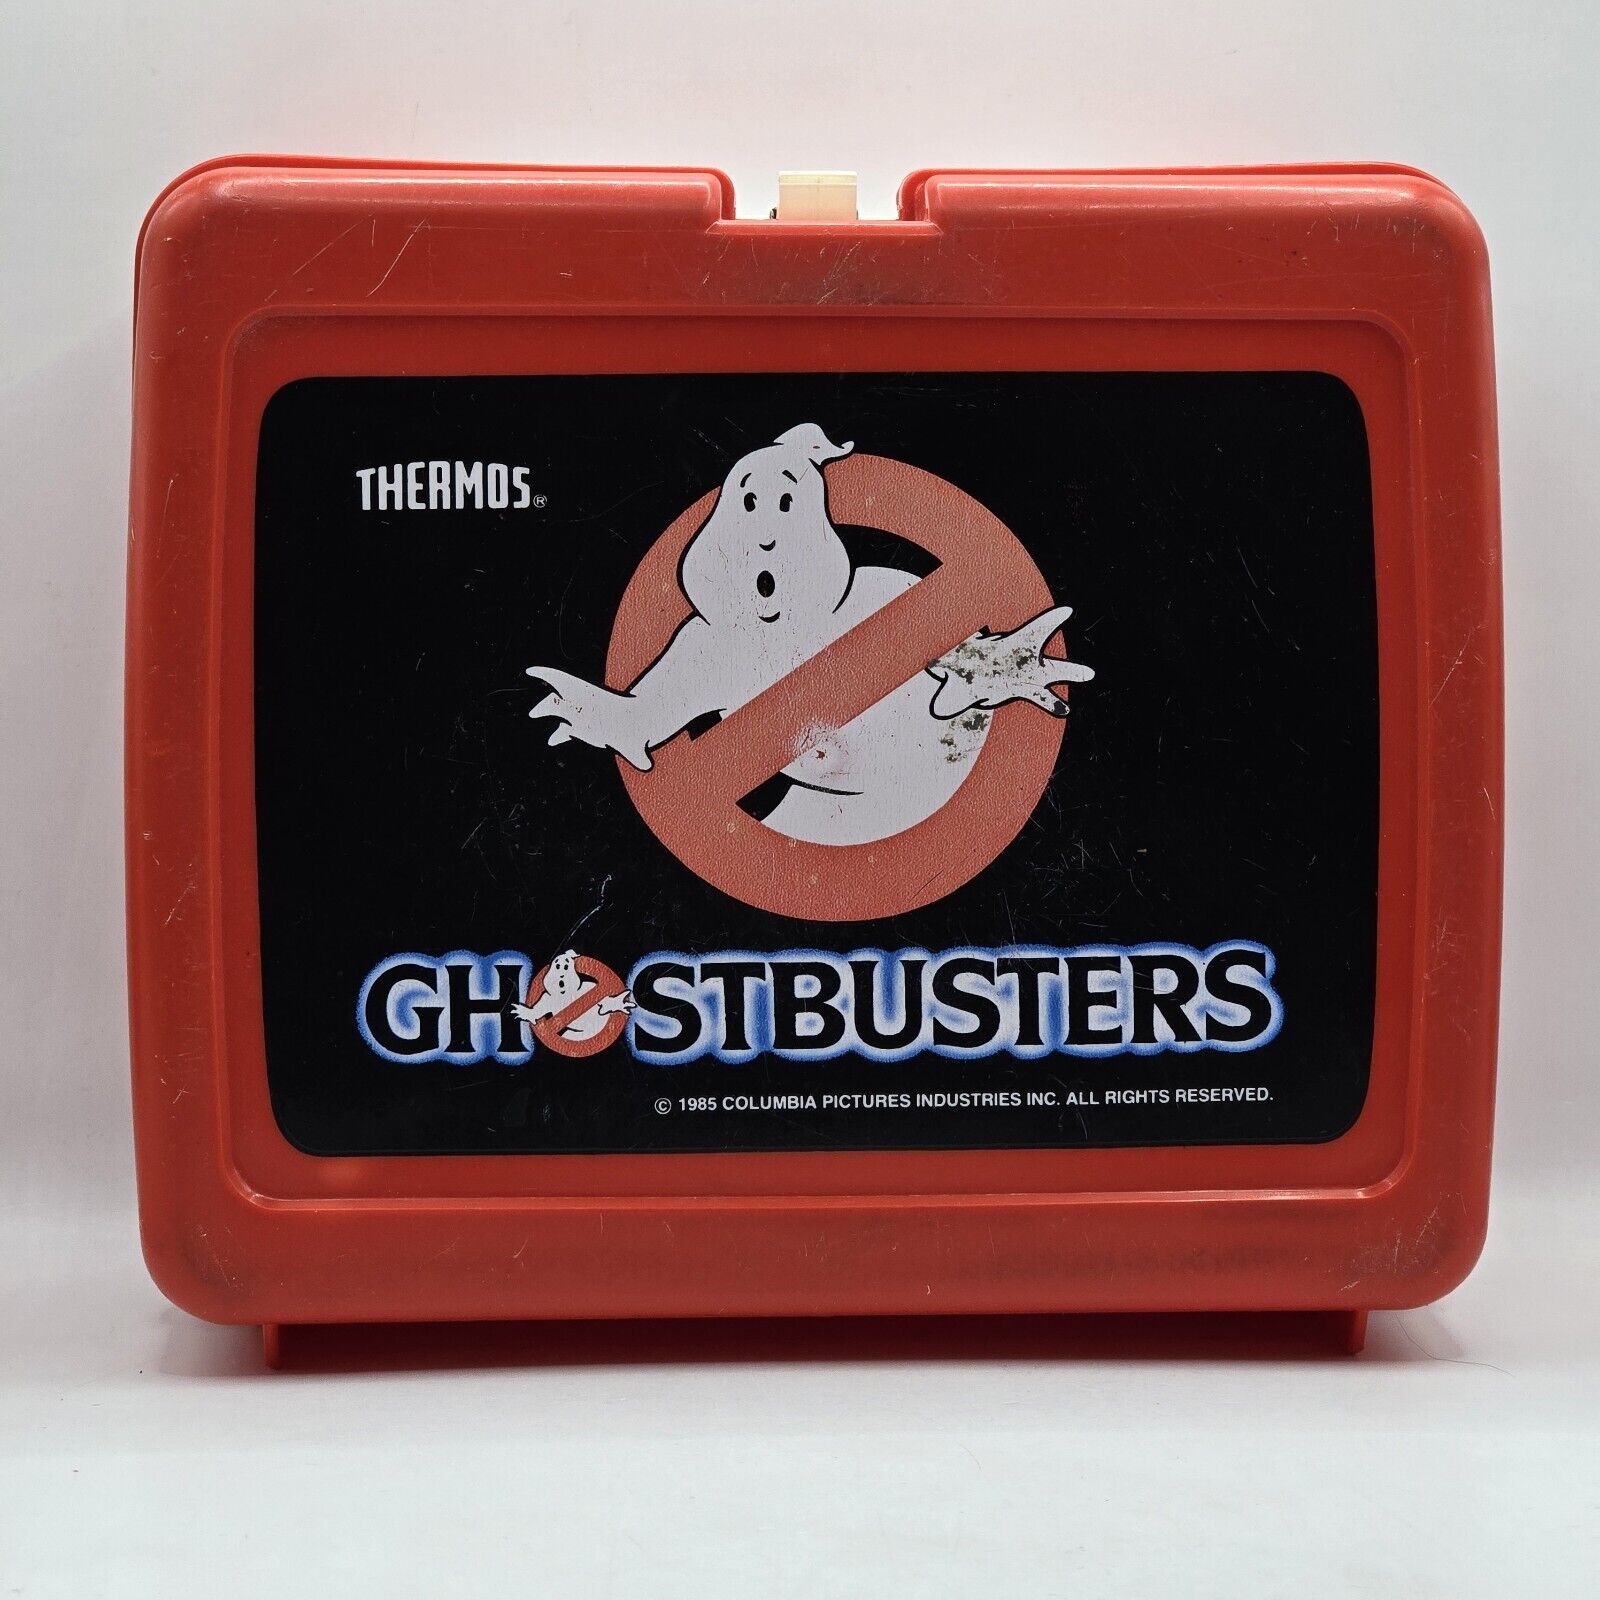 Vintage 1985 Original Ghostbusters Movie Lunch Box Lunchbox No Thermos